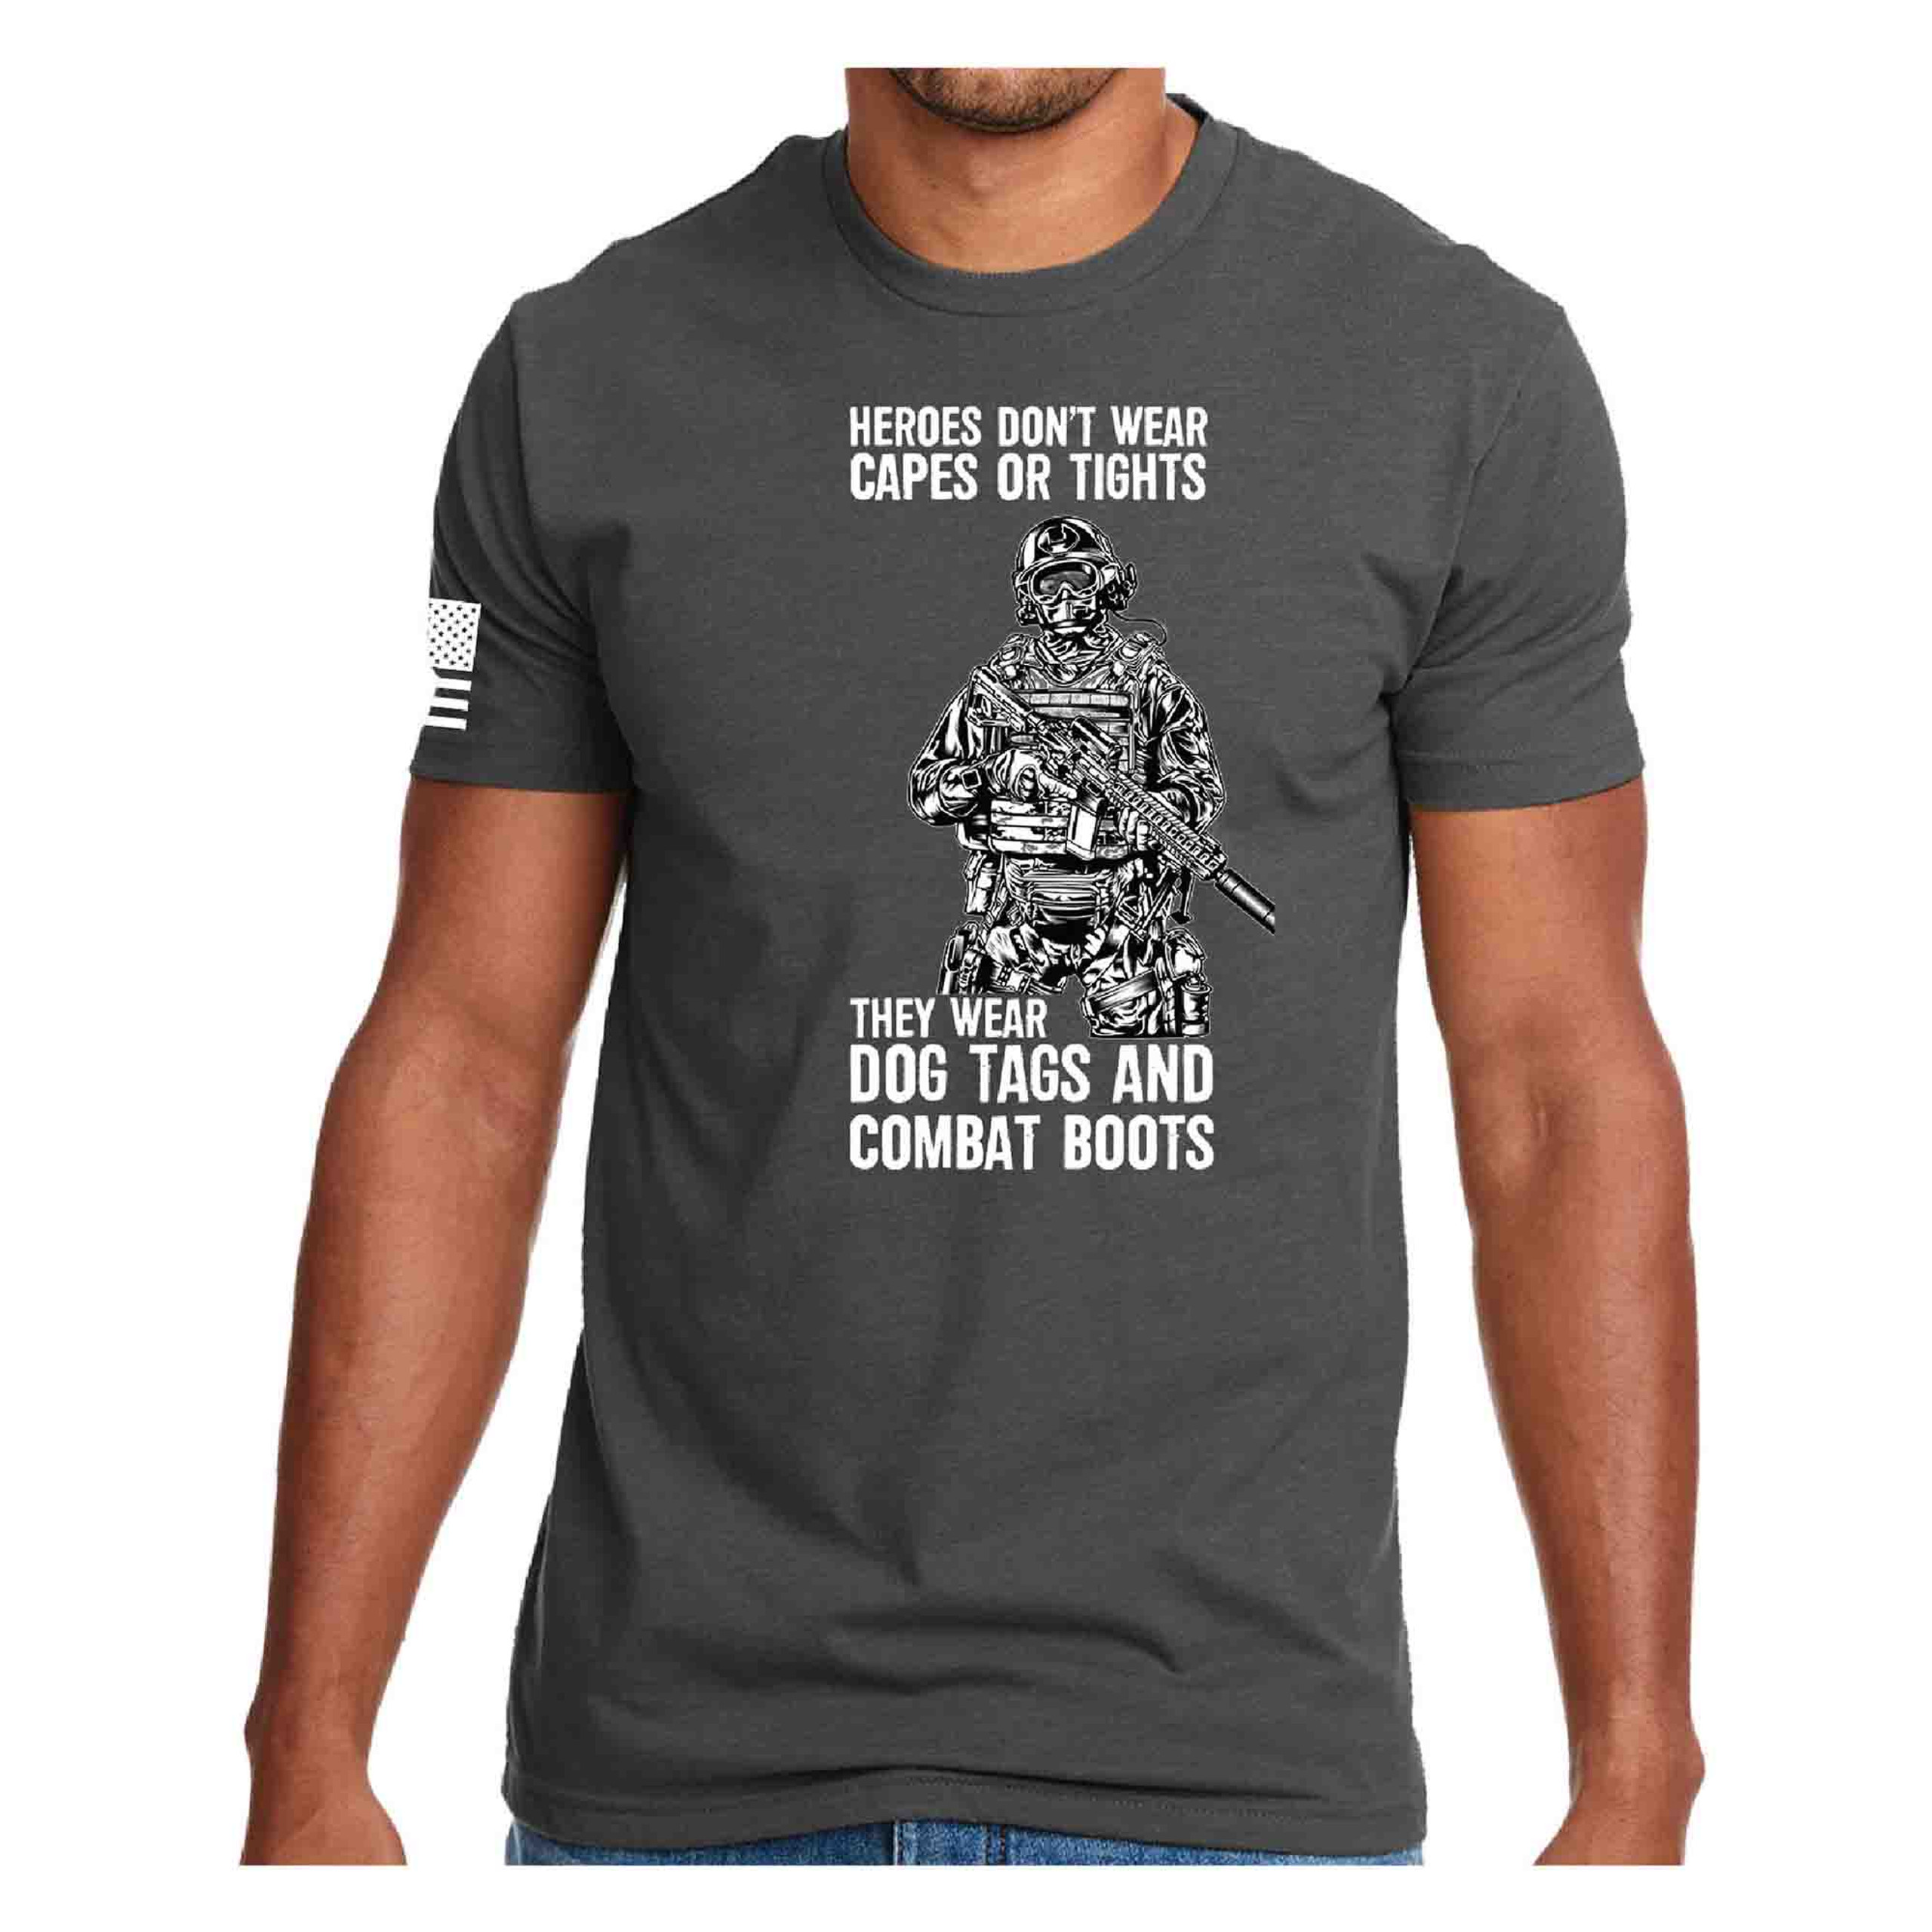 Heroes Wear Dog Tags And Combat Boots T-Shirt with American Flag on Sleeve